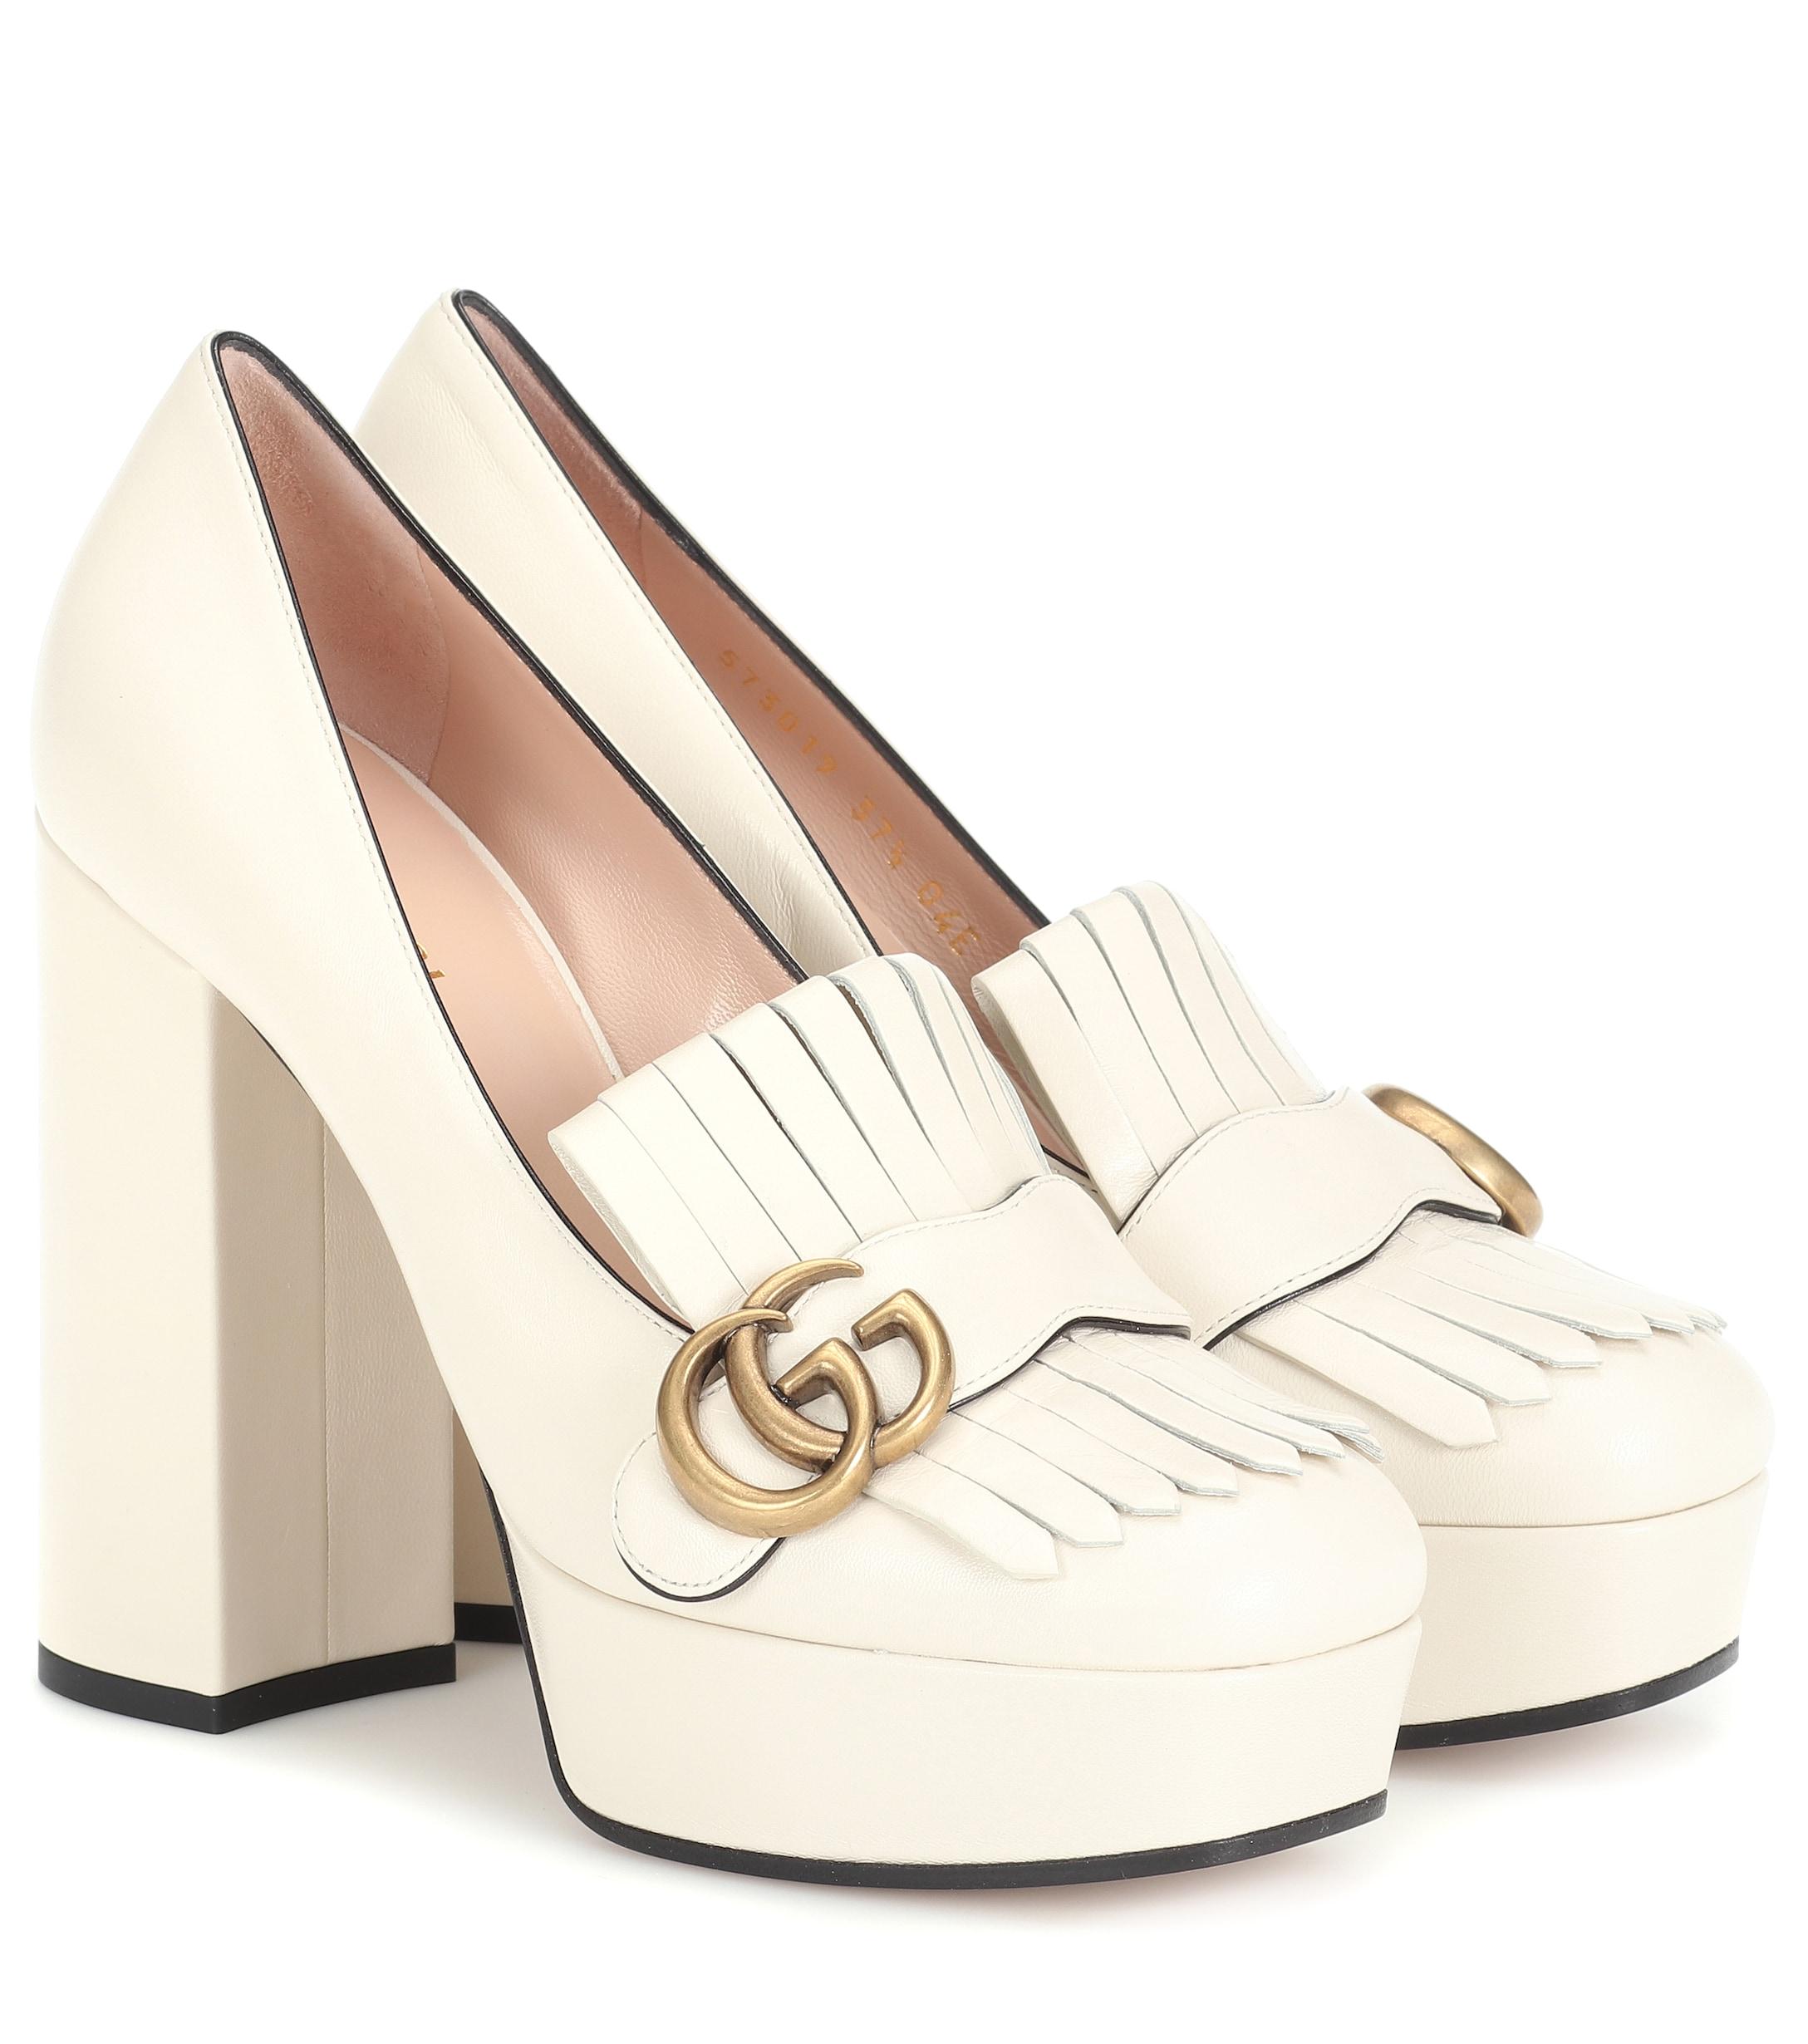 Gucci Marmont Leather Platform Pumps in White - Lyst